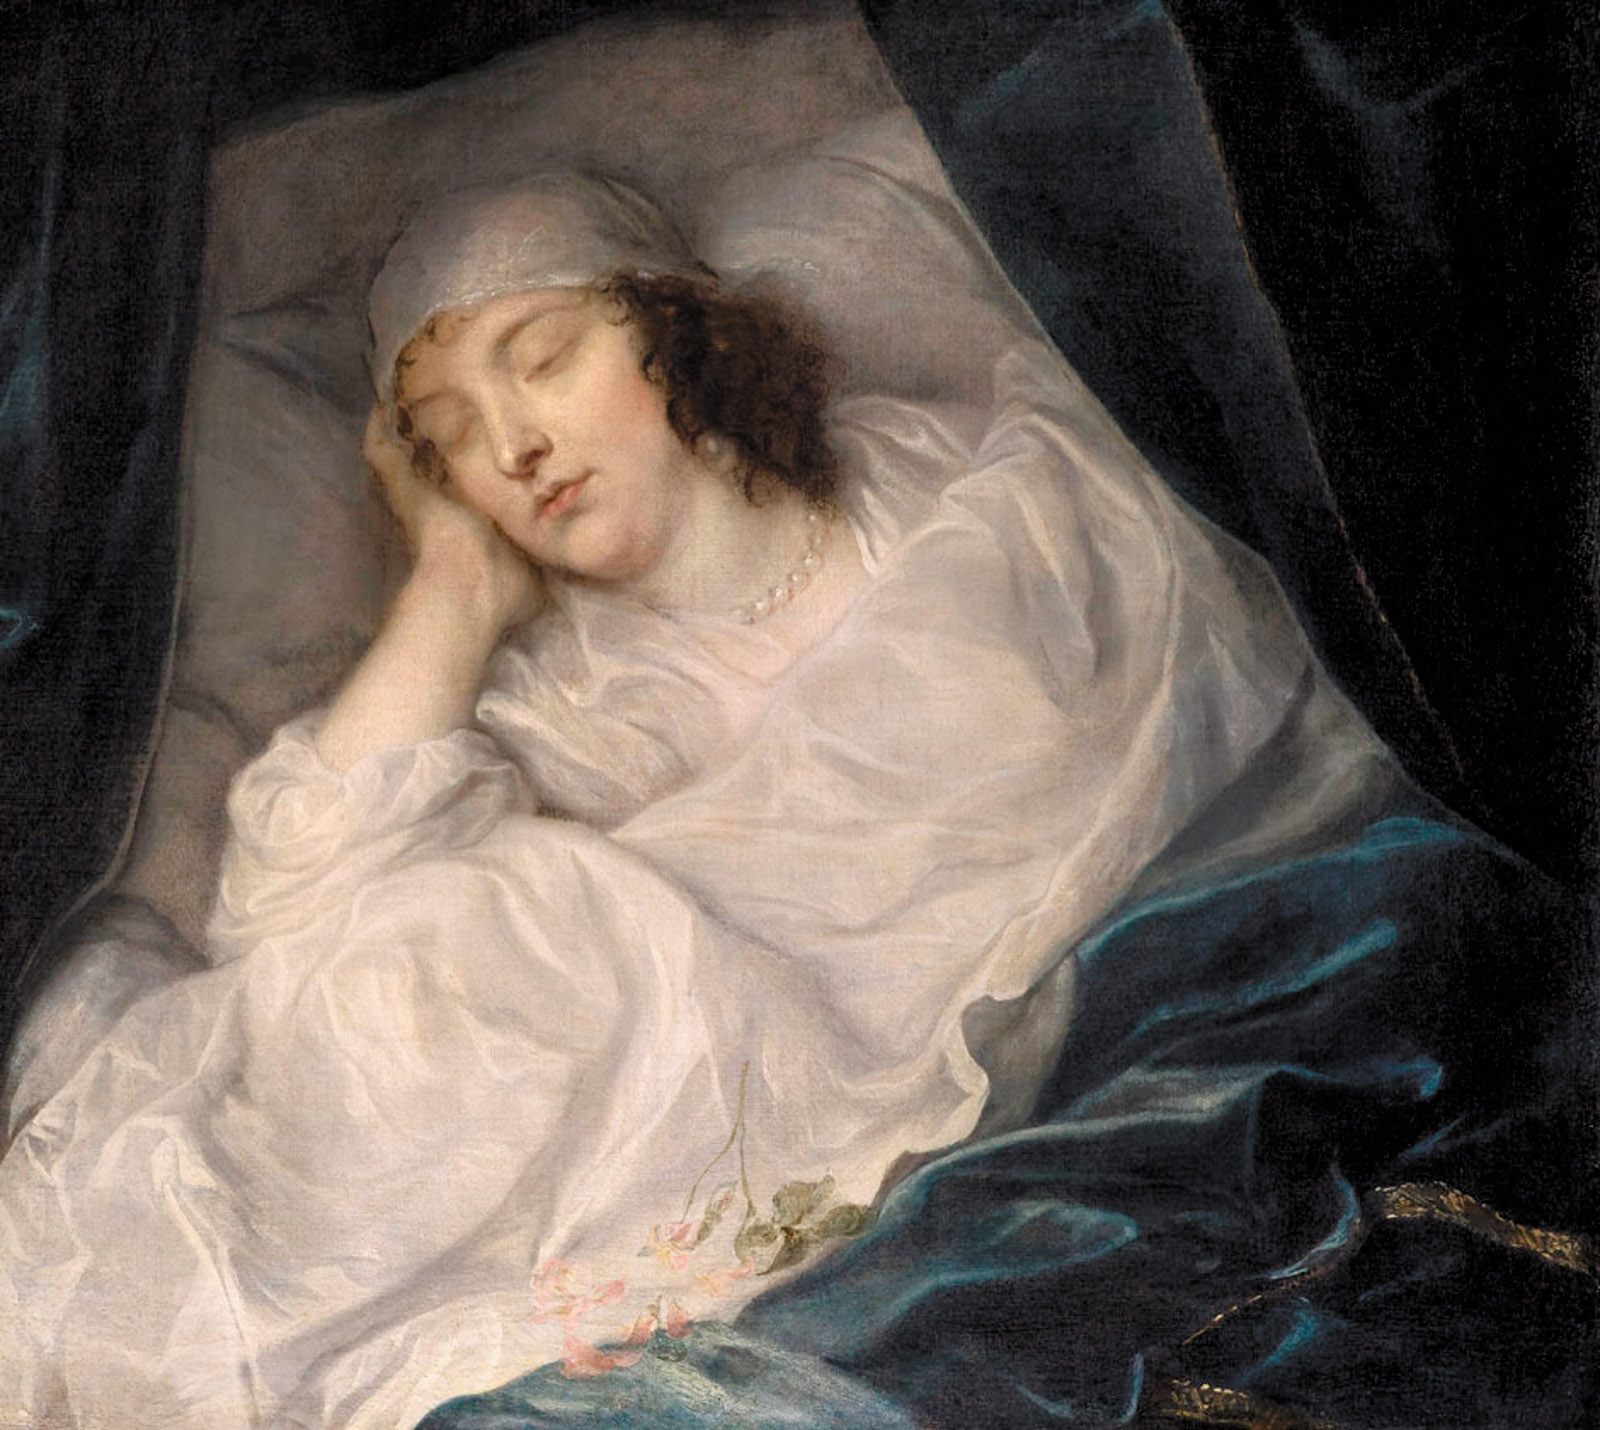 Anthony van Dyck: Venetia, Lady Digby, on Her Deathbed, 1633